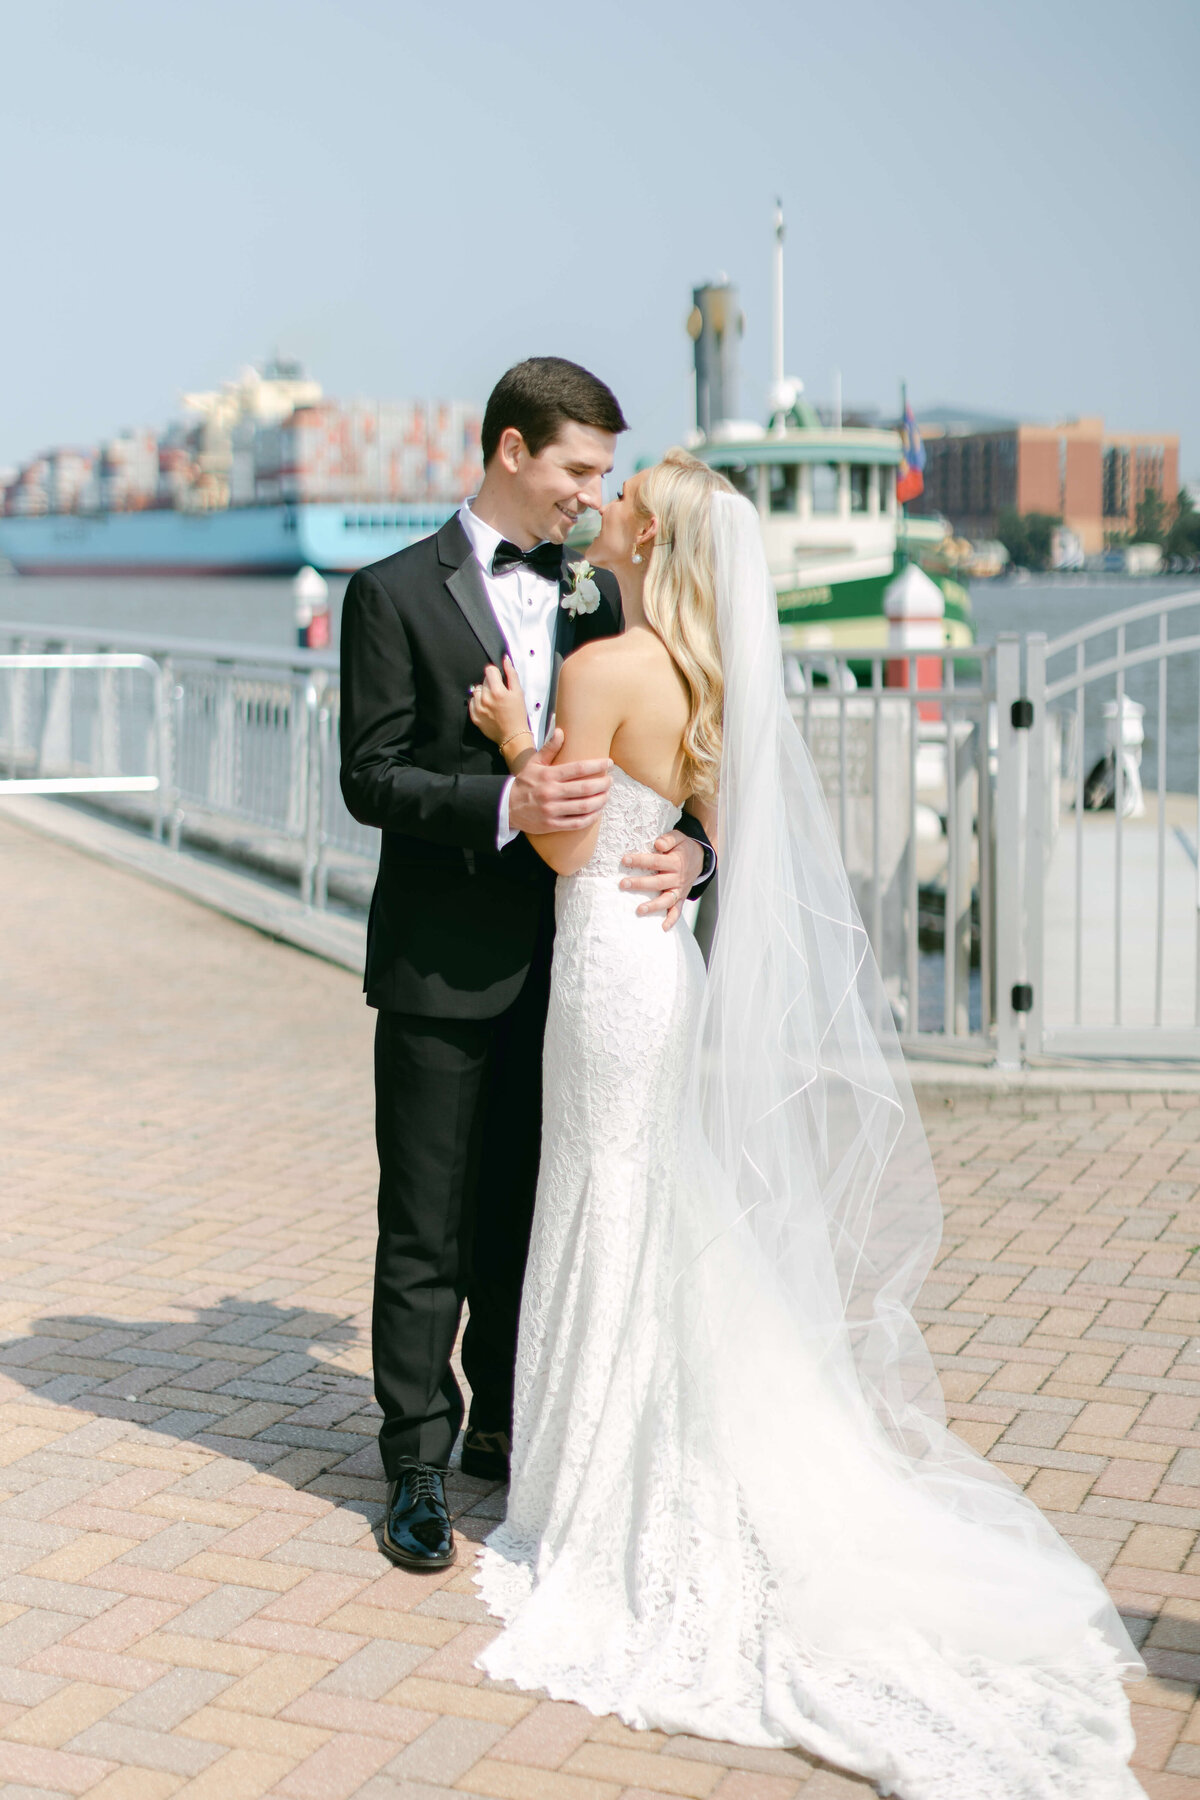 A bride and groom hold eachother in front of Savannah.